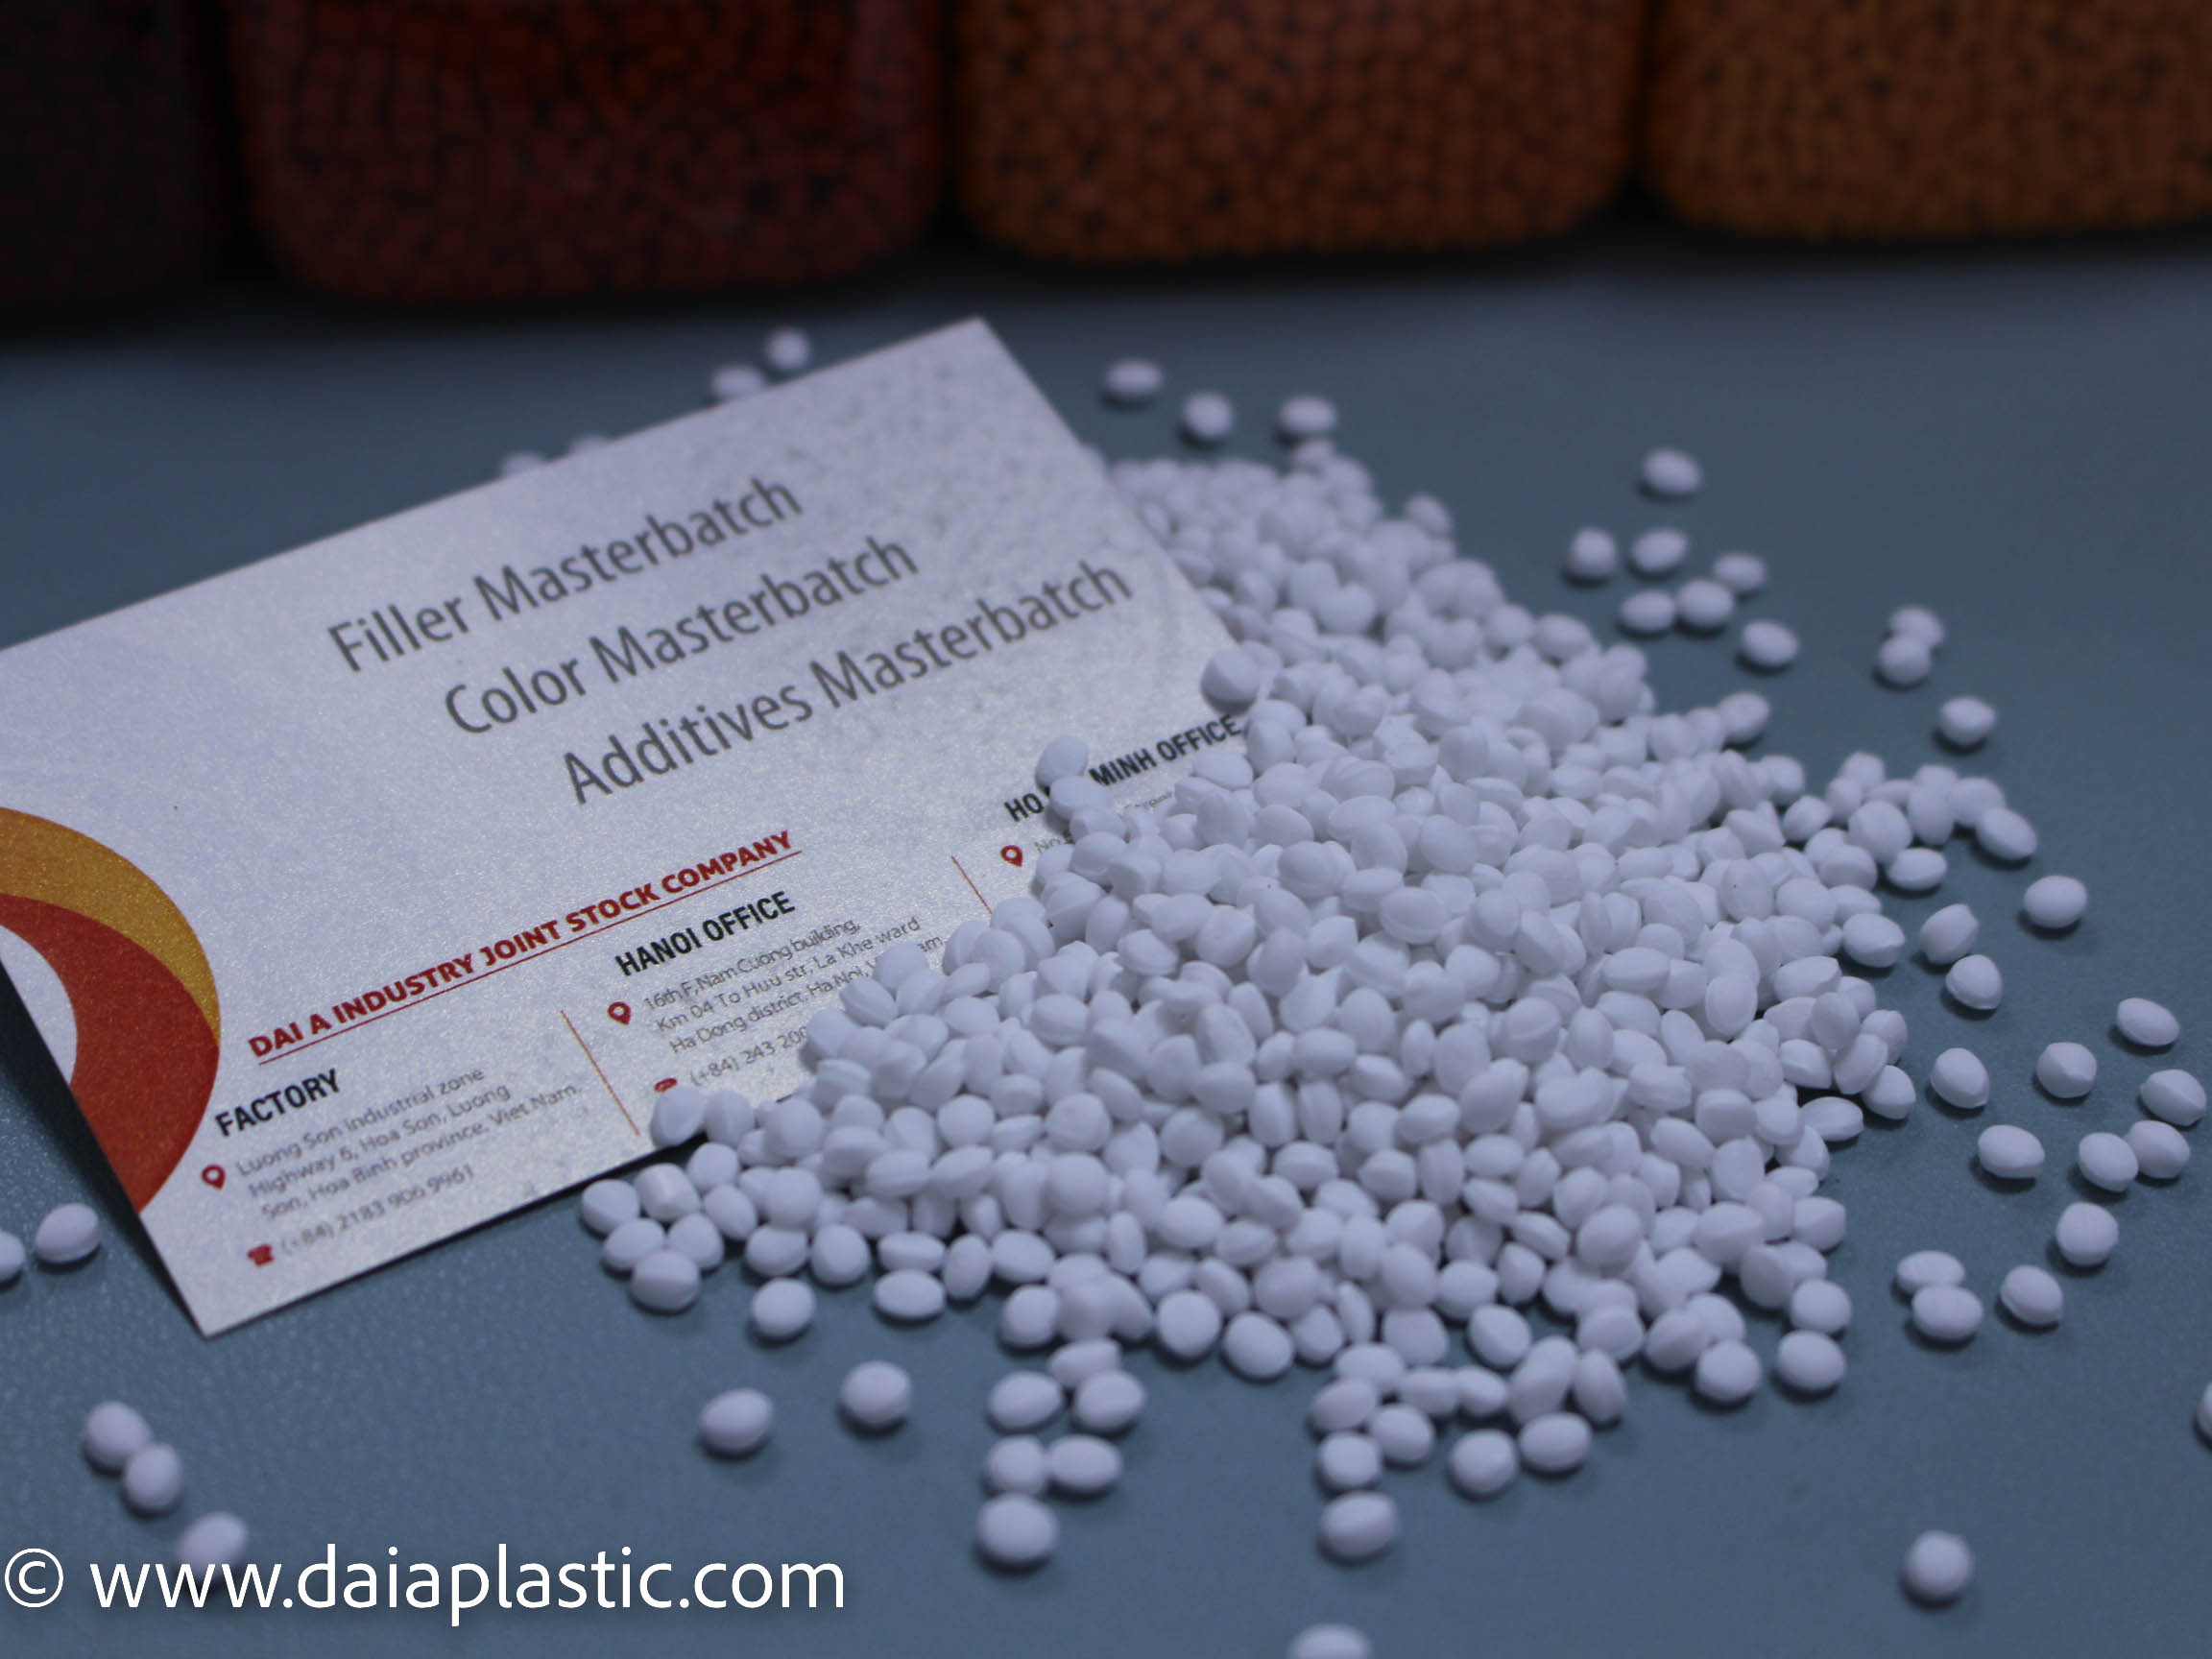 What is filler masterbatch and how it is applied in the plastic industry?